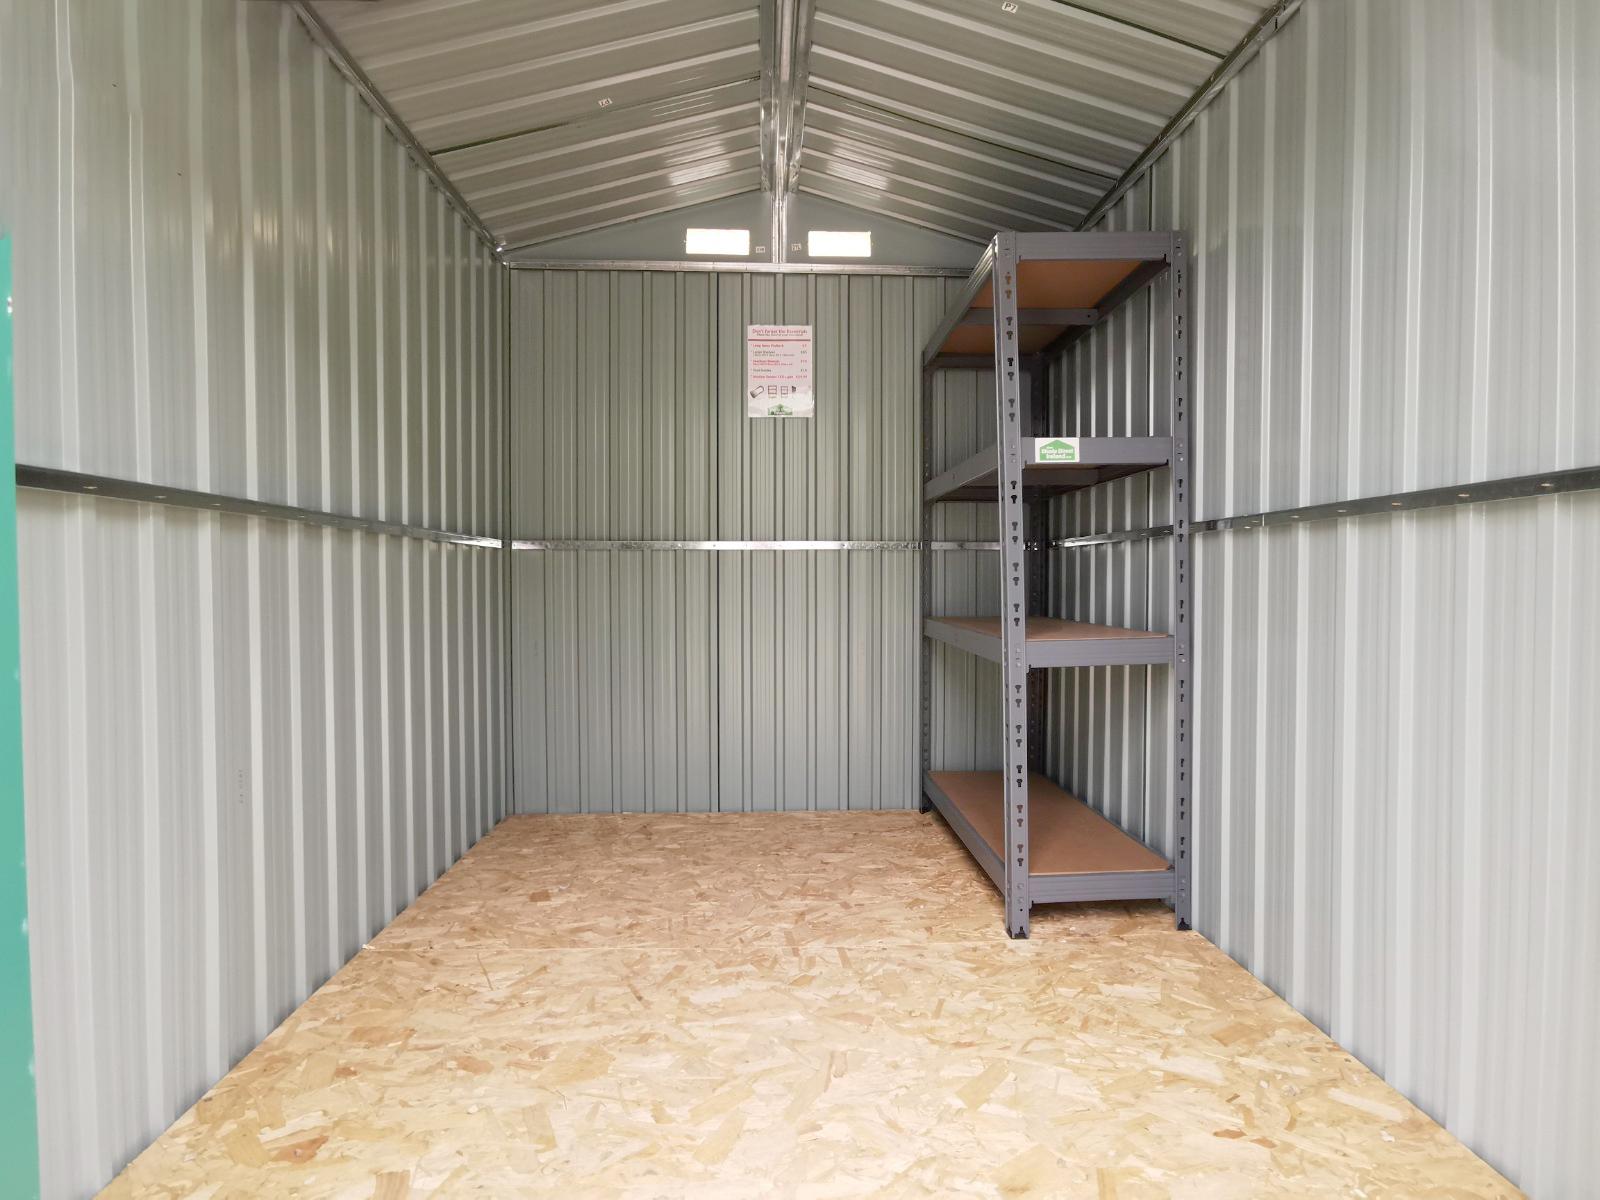 An internal view of the 6ft x 8ft steel garden shed as seen from the door, looking inwards.